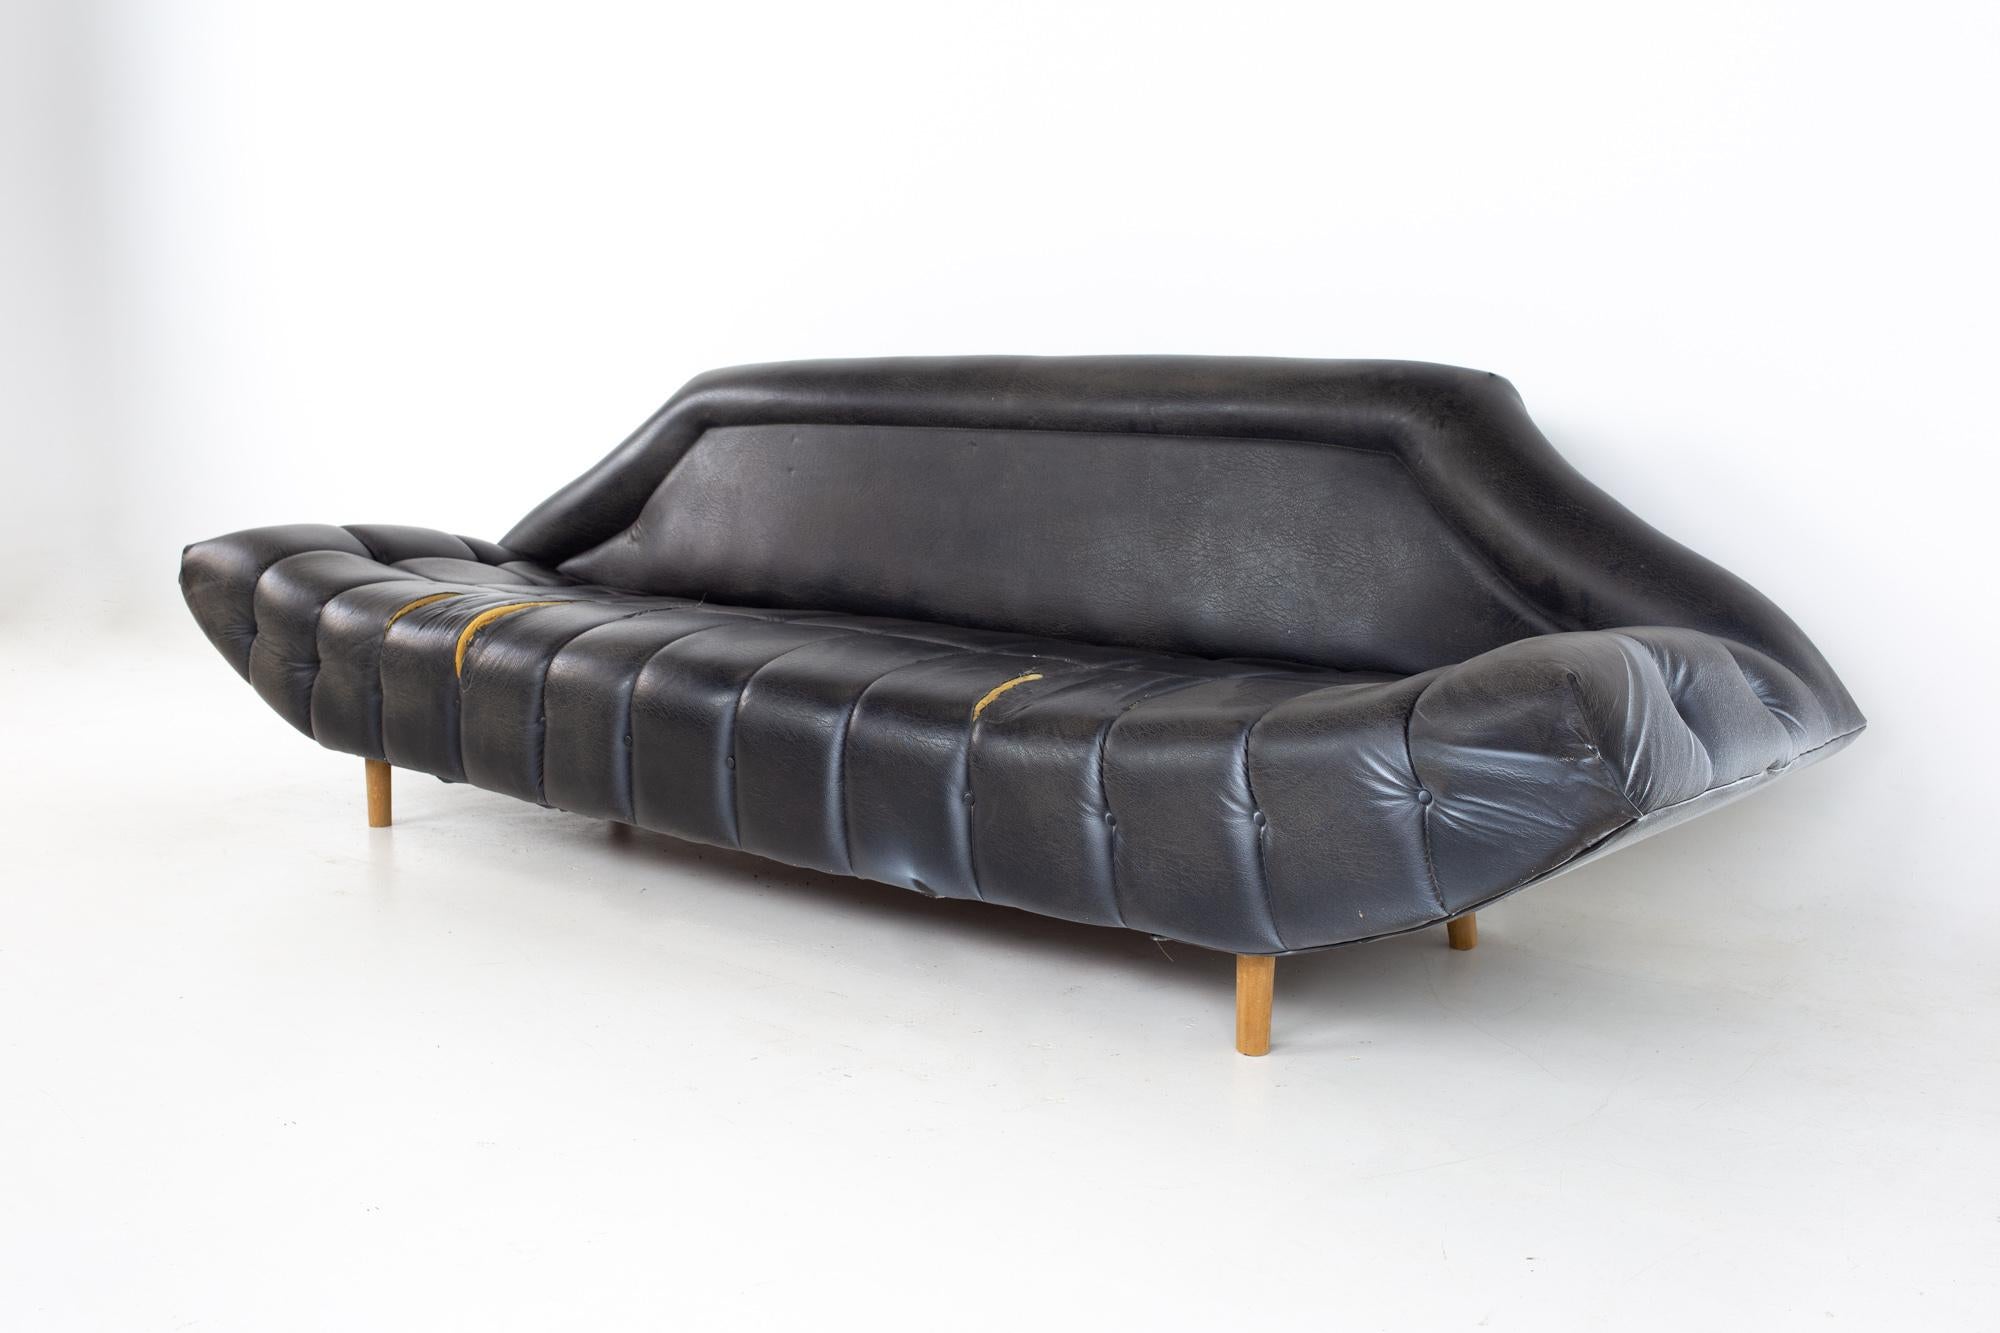 Adrian Pearsall style Kroehler mid century Gondola sofa
Sofa measures: 107 wide x 34 deep x 31 high, with a seat height of 15 inches
Ready for re-upholstery

All pieces of furniture can be had in what we call restored vintage condition. That